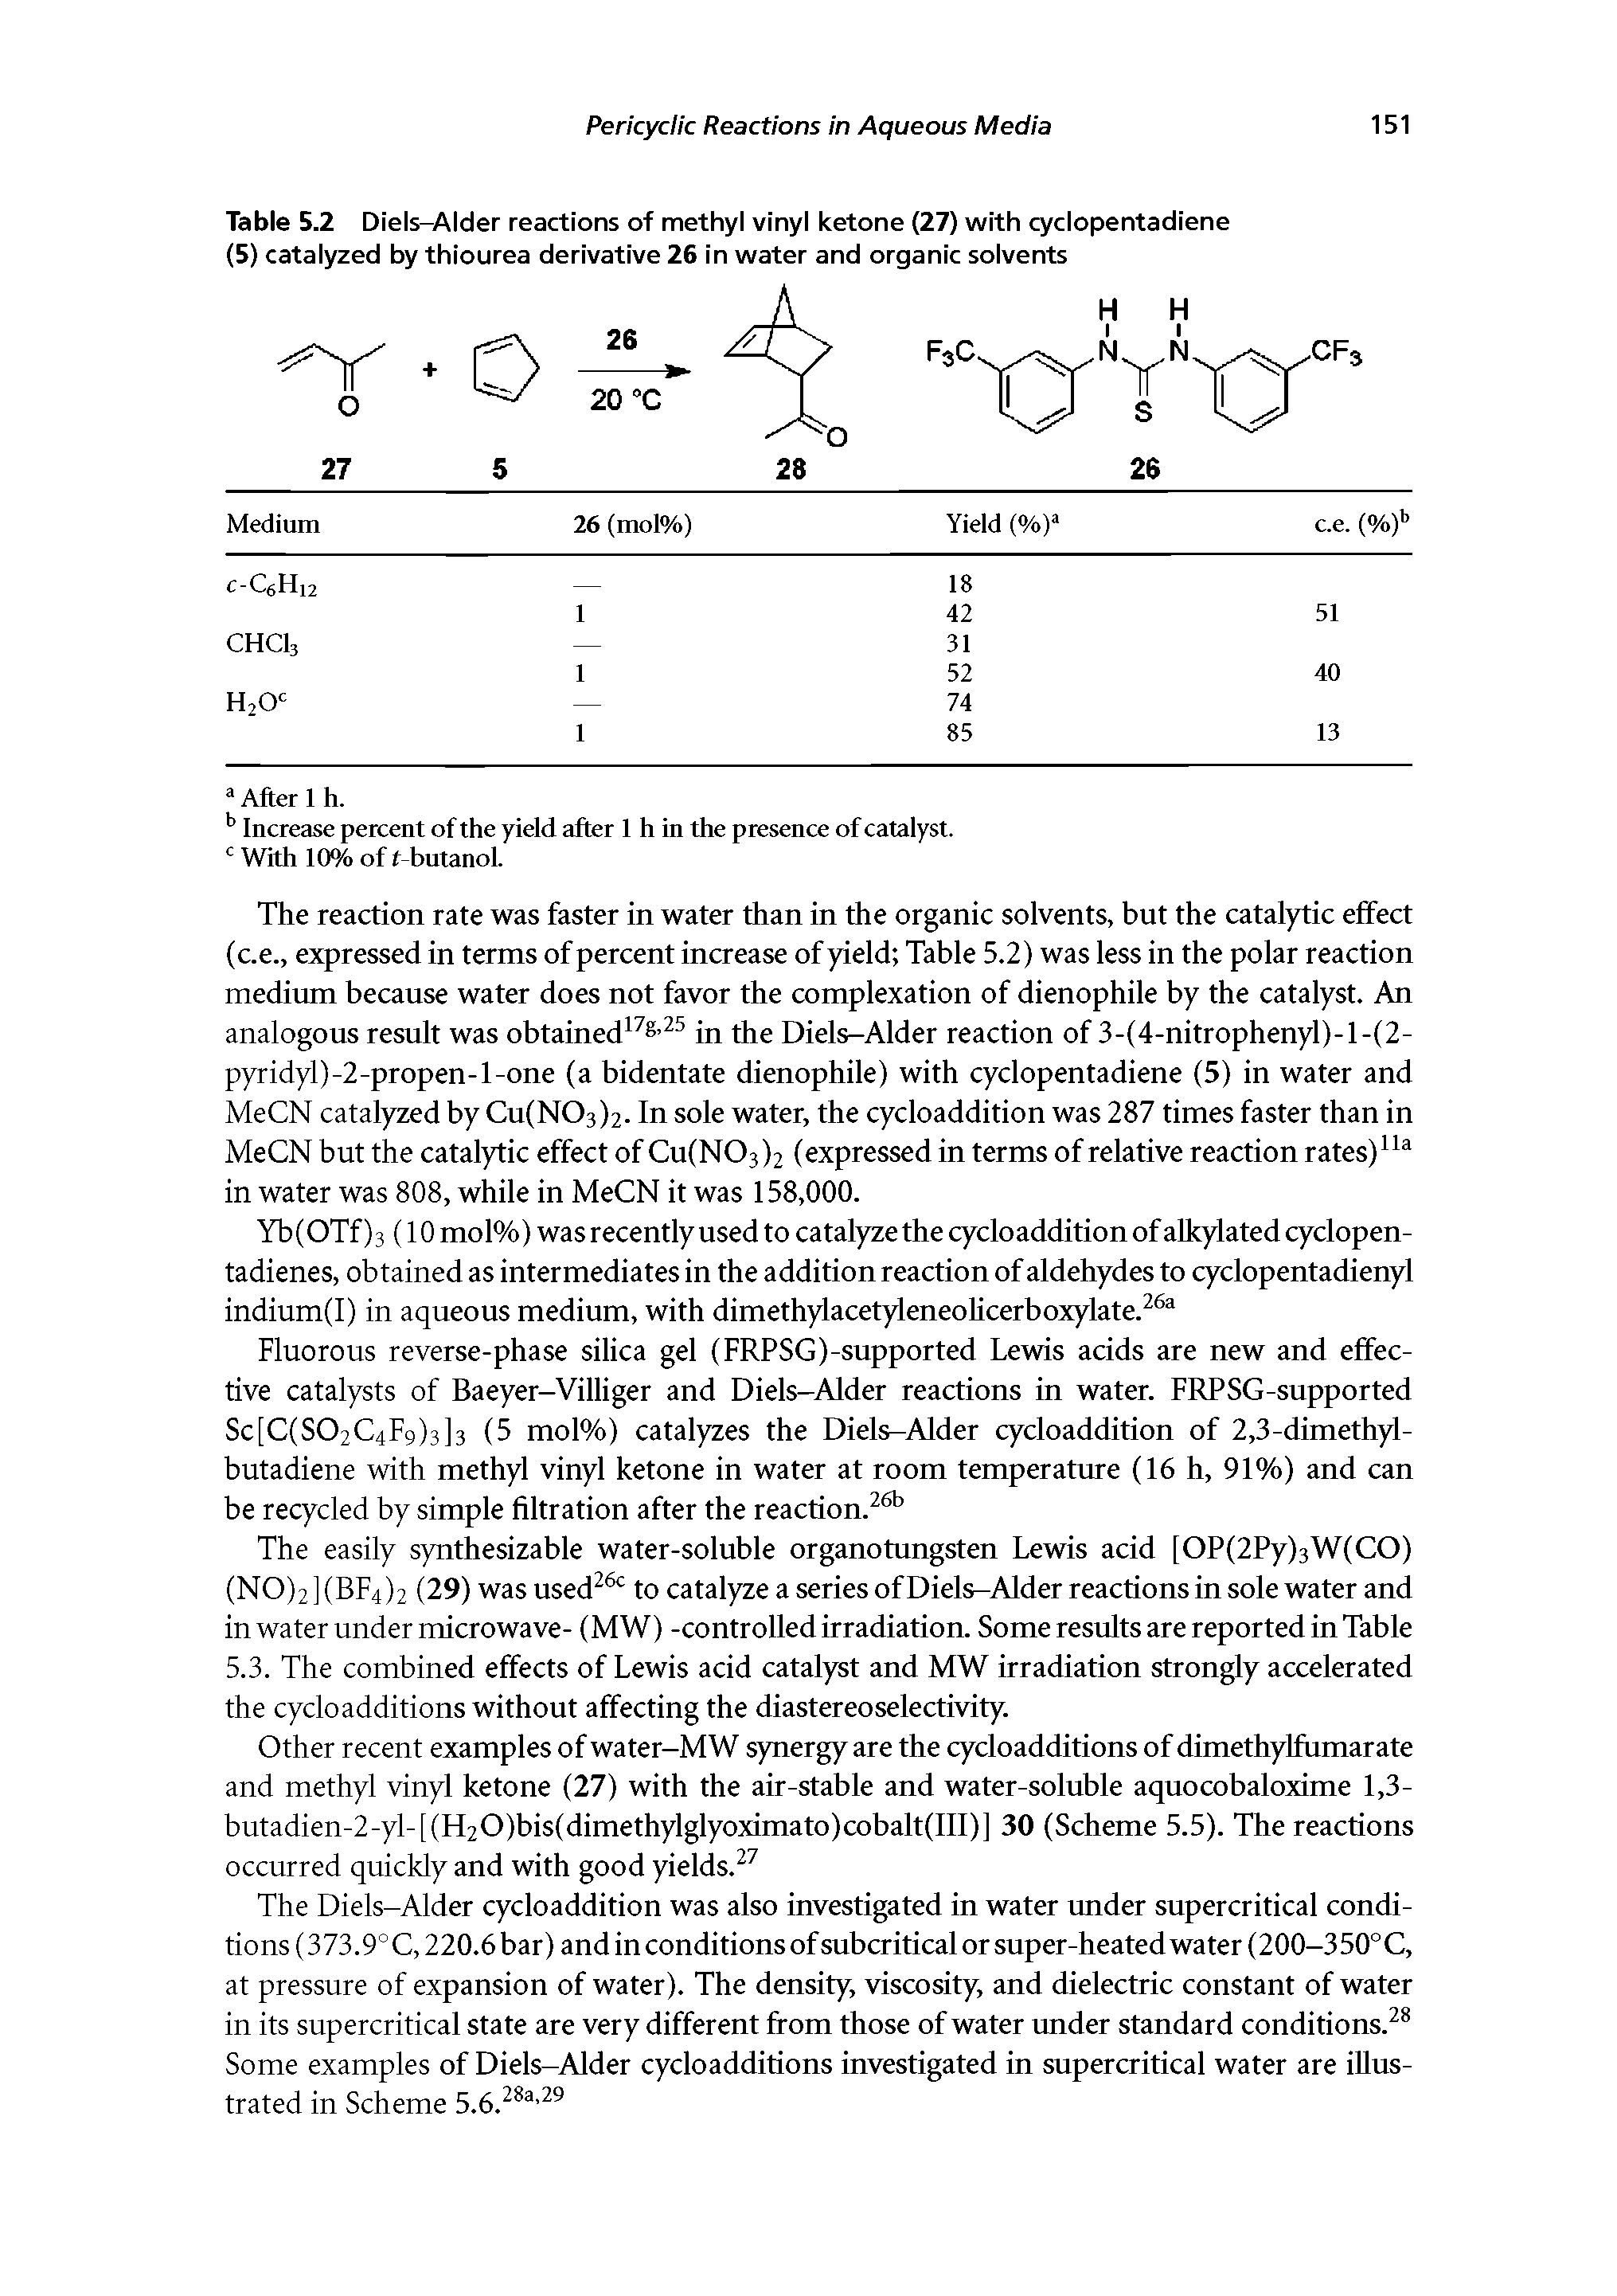 Table 5.2 Diels-Alder reactions of methyl vinyl ketone (27) with cyclopentadiene (5) catalyzed by thiourea derivative 26 in water and organic solvents...